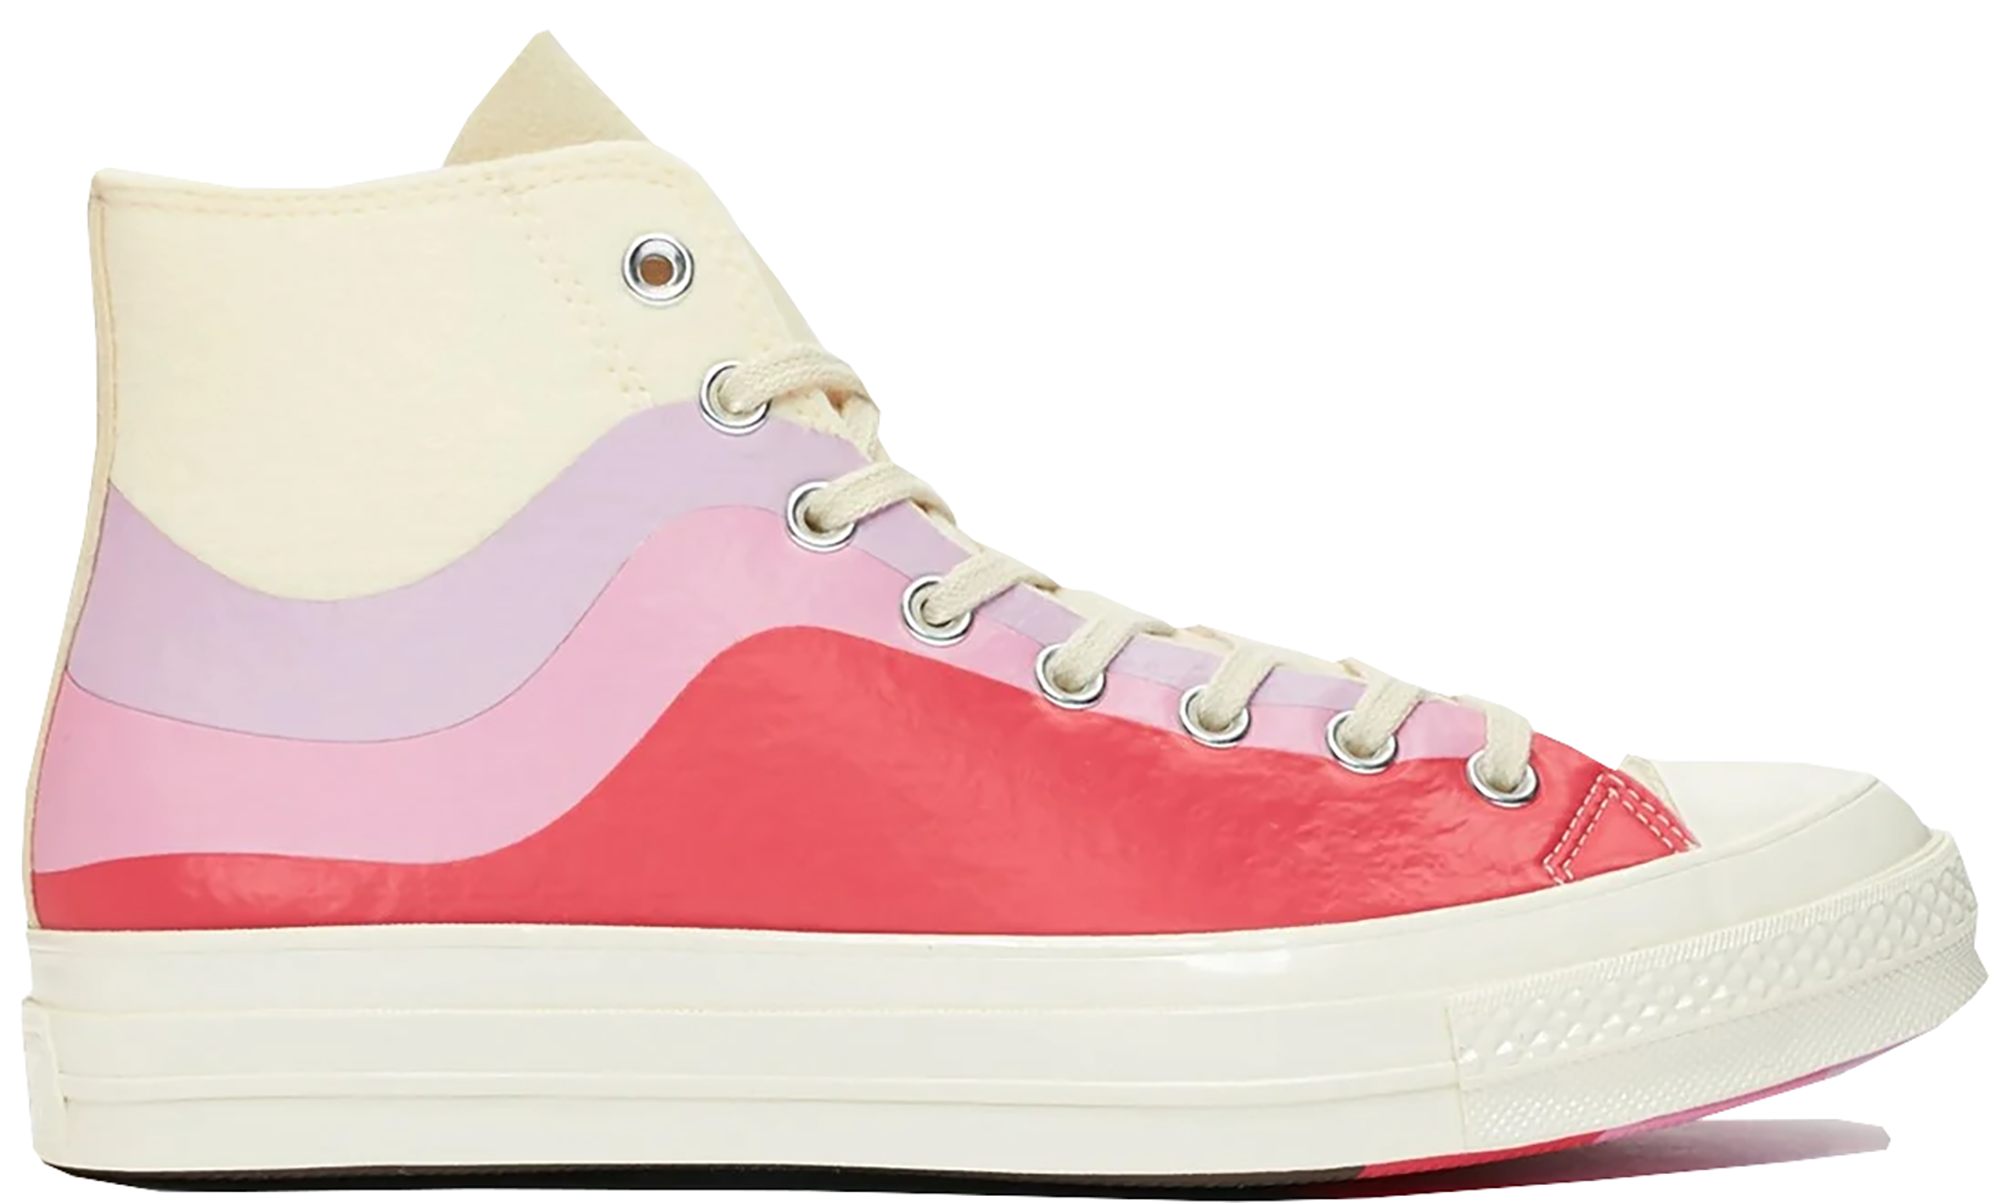 converse all star low leather arctic pink rose gold